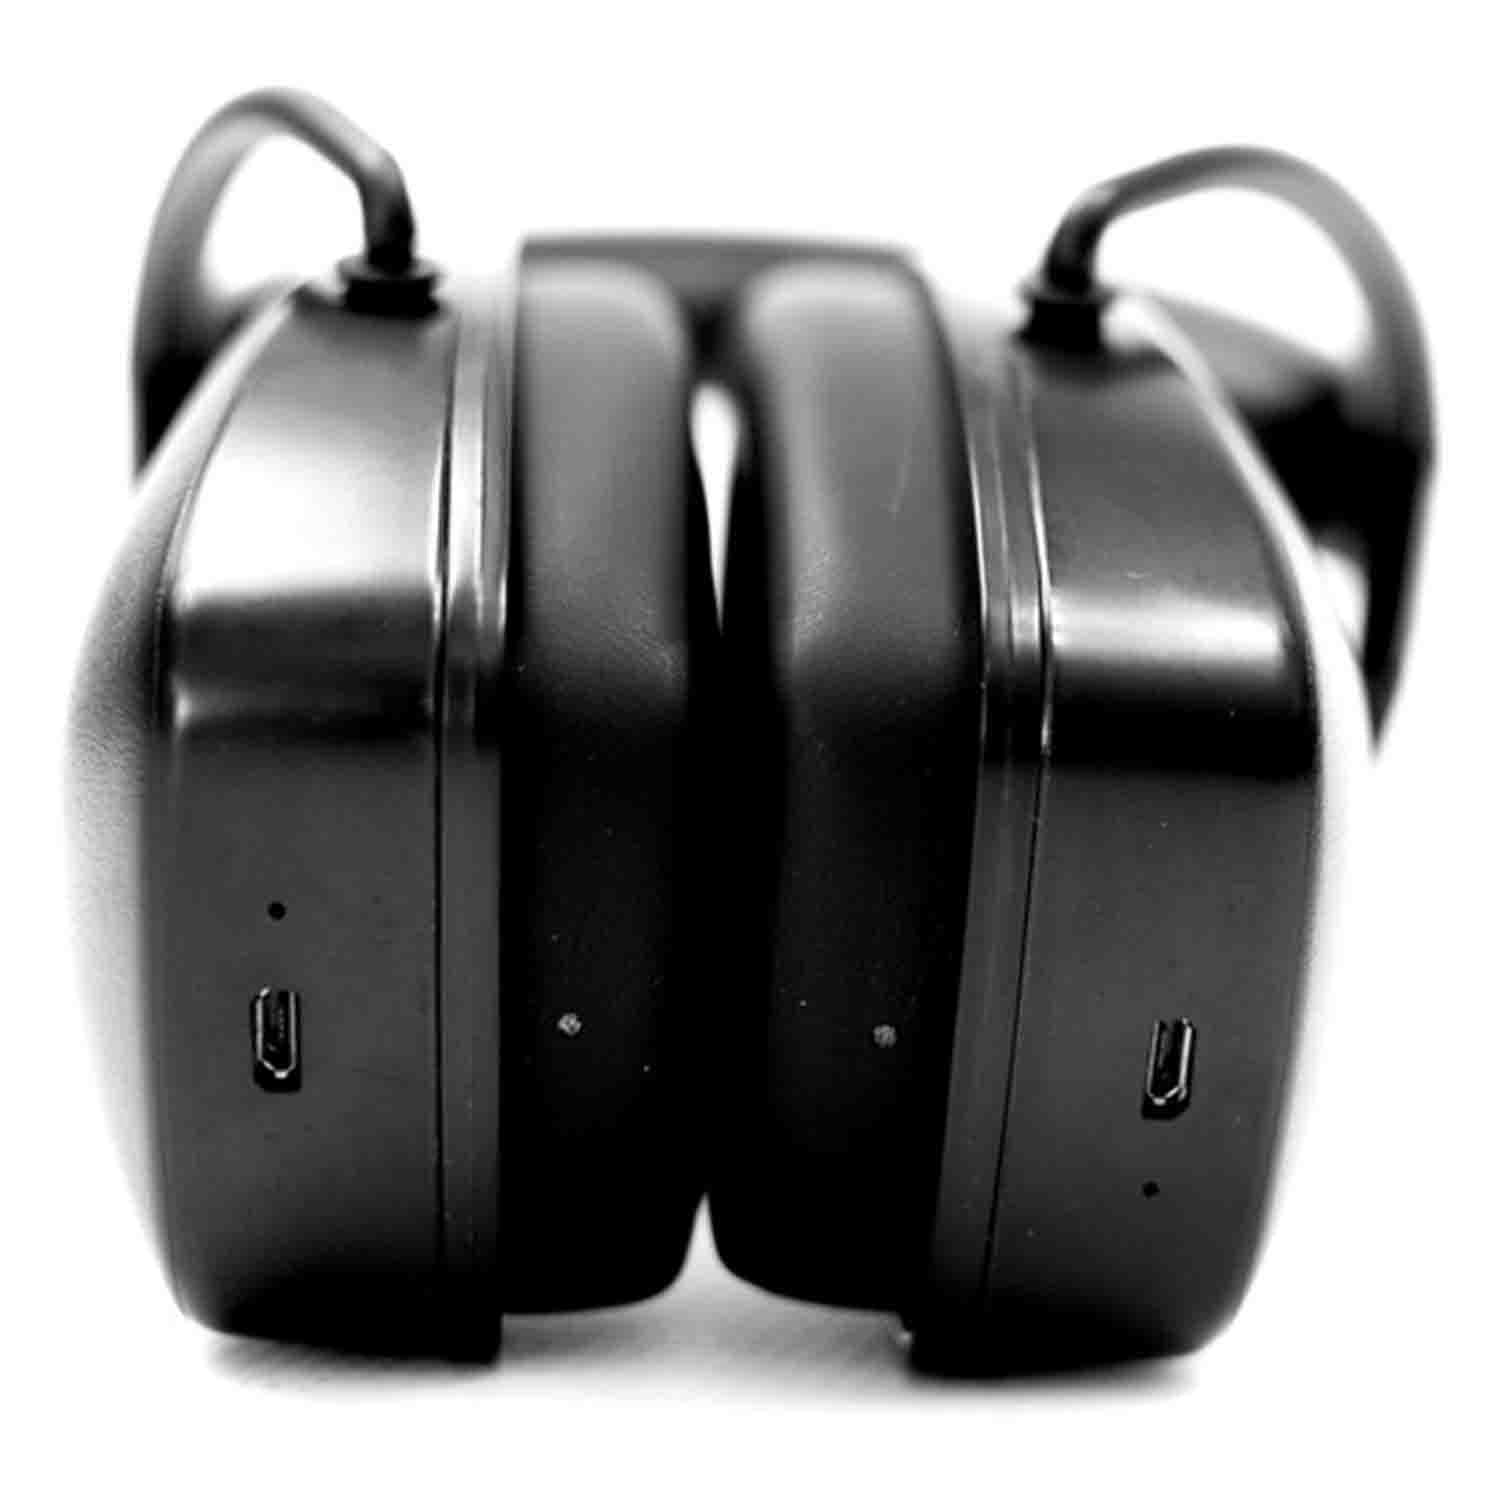 Direct Sound EXTW37 PRO True Wireless Closed-Back Isolating Headphones with Mic - Black - Hollywood DJ